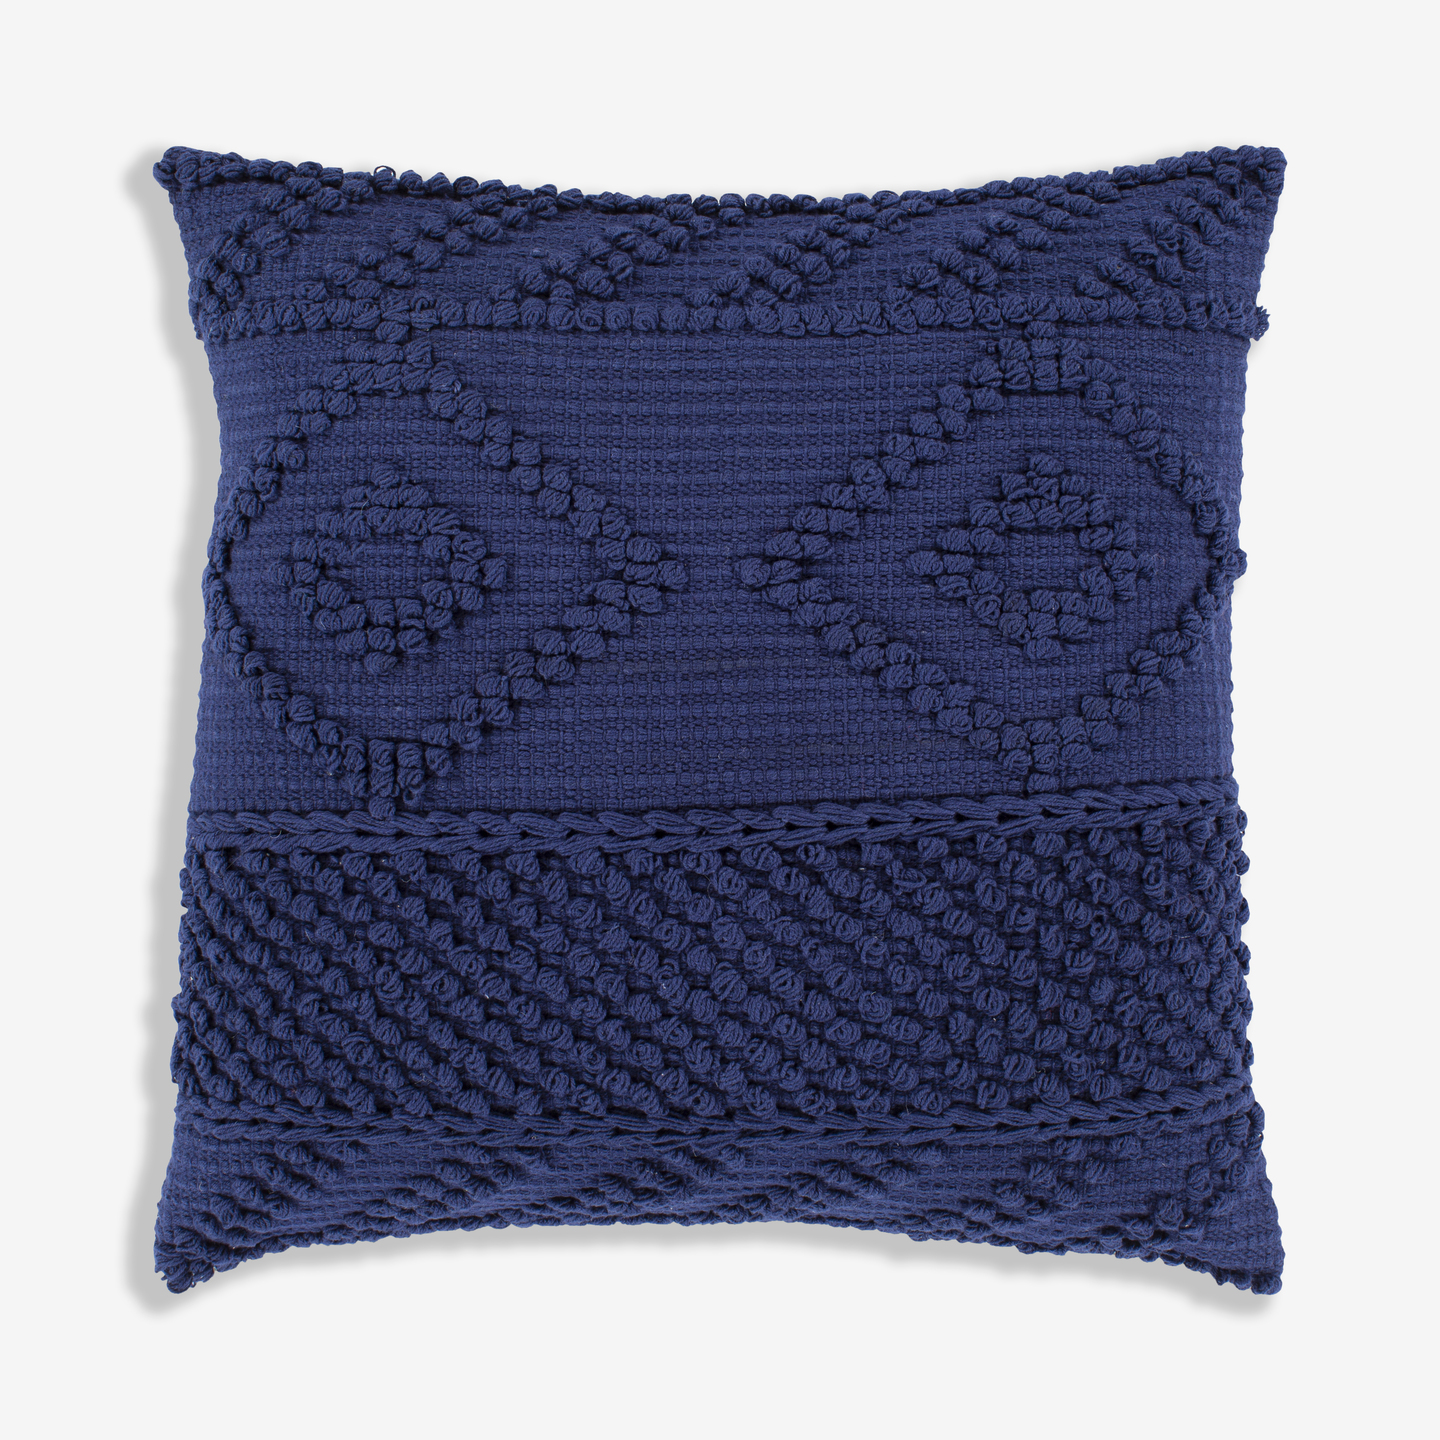 1357_Midnight-Throw-Pillow_Front_2021